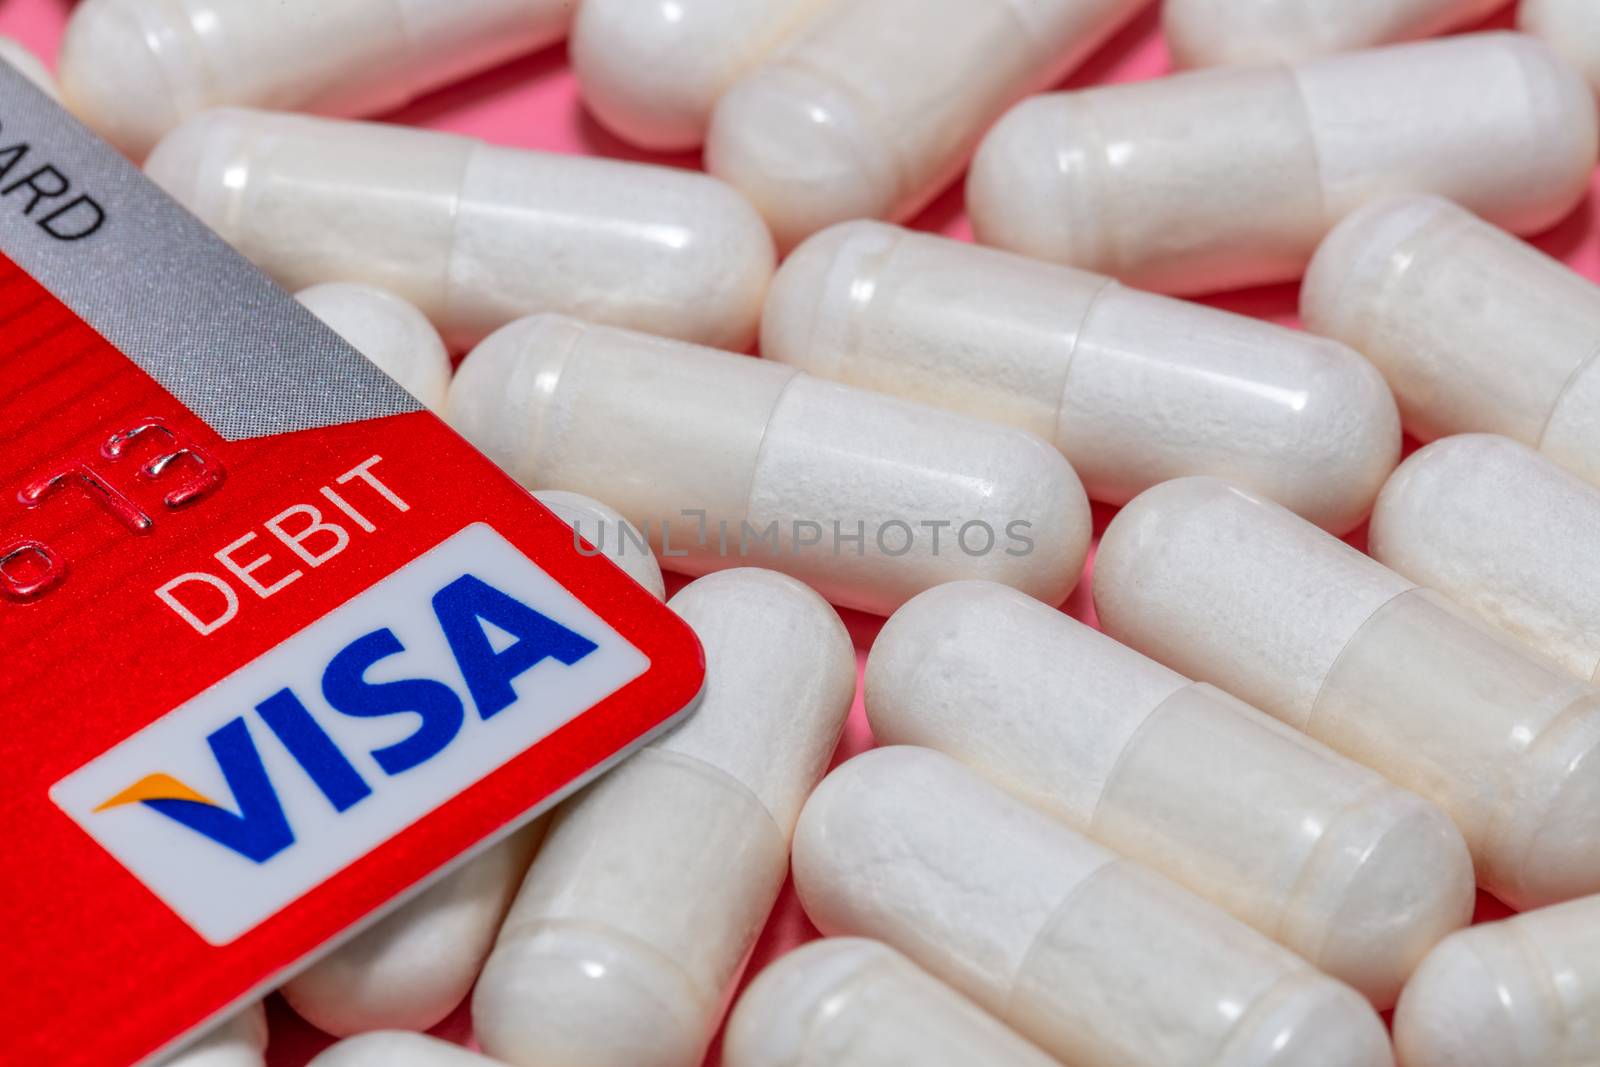 Barnaul, Russia - October 13, 2020: High angle close up shot of corner of a red visa debit card, white pills on pink background. Close up shot. Healthcare, pharmaceutical business, commerce concepts